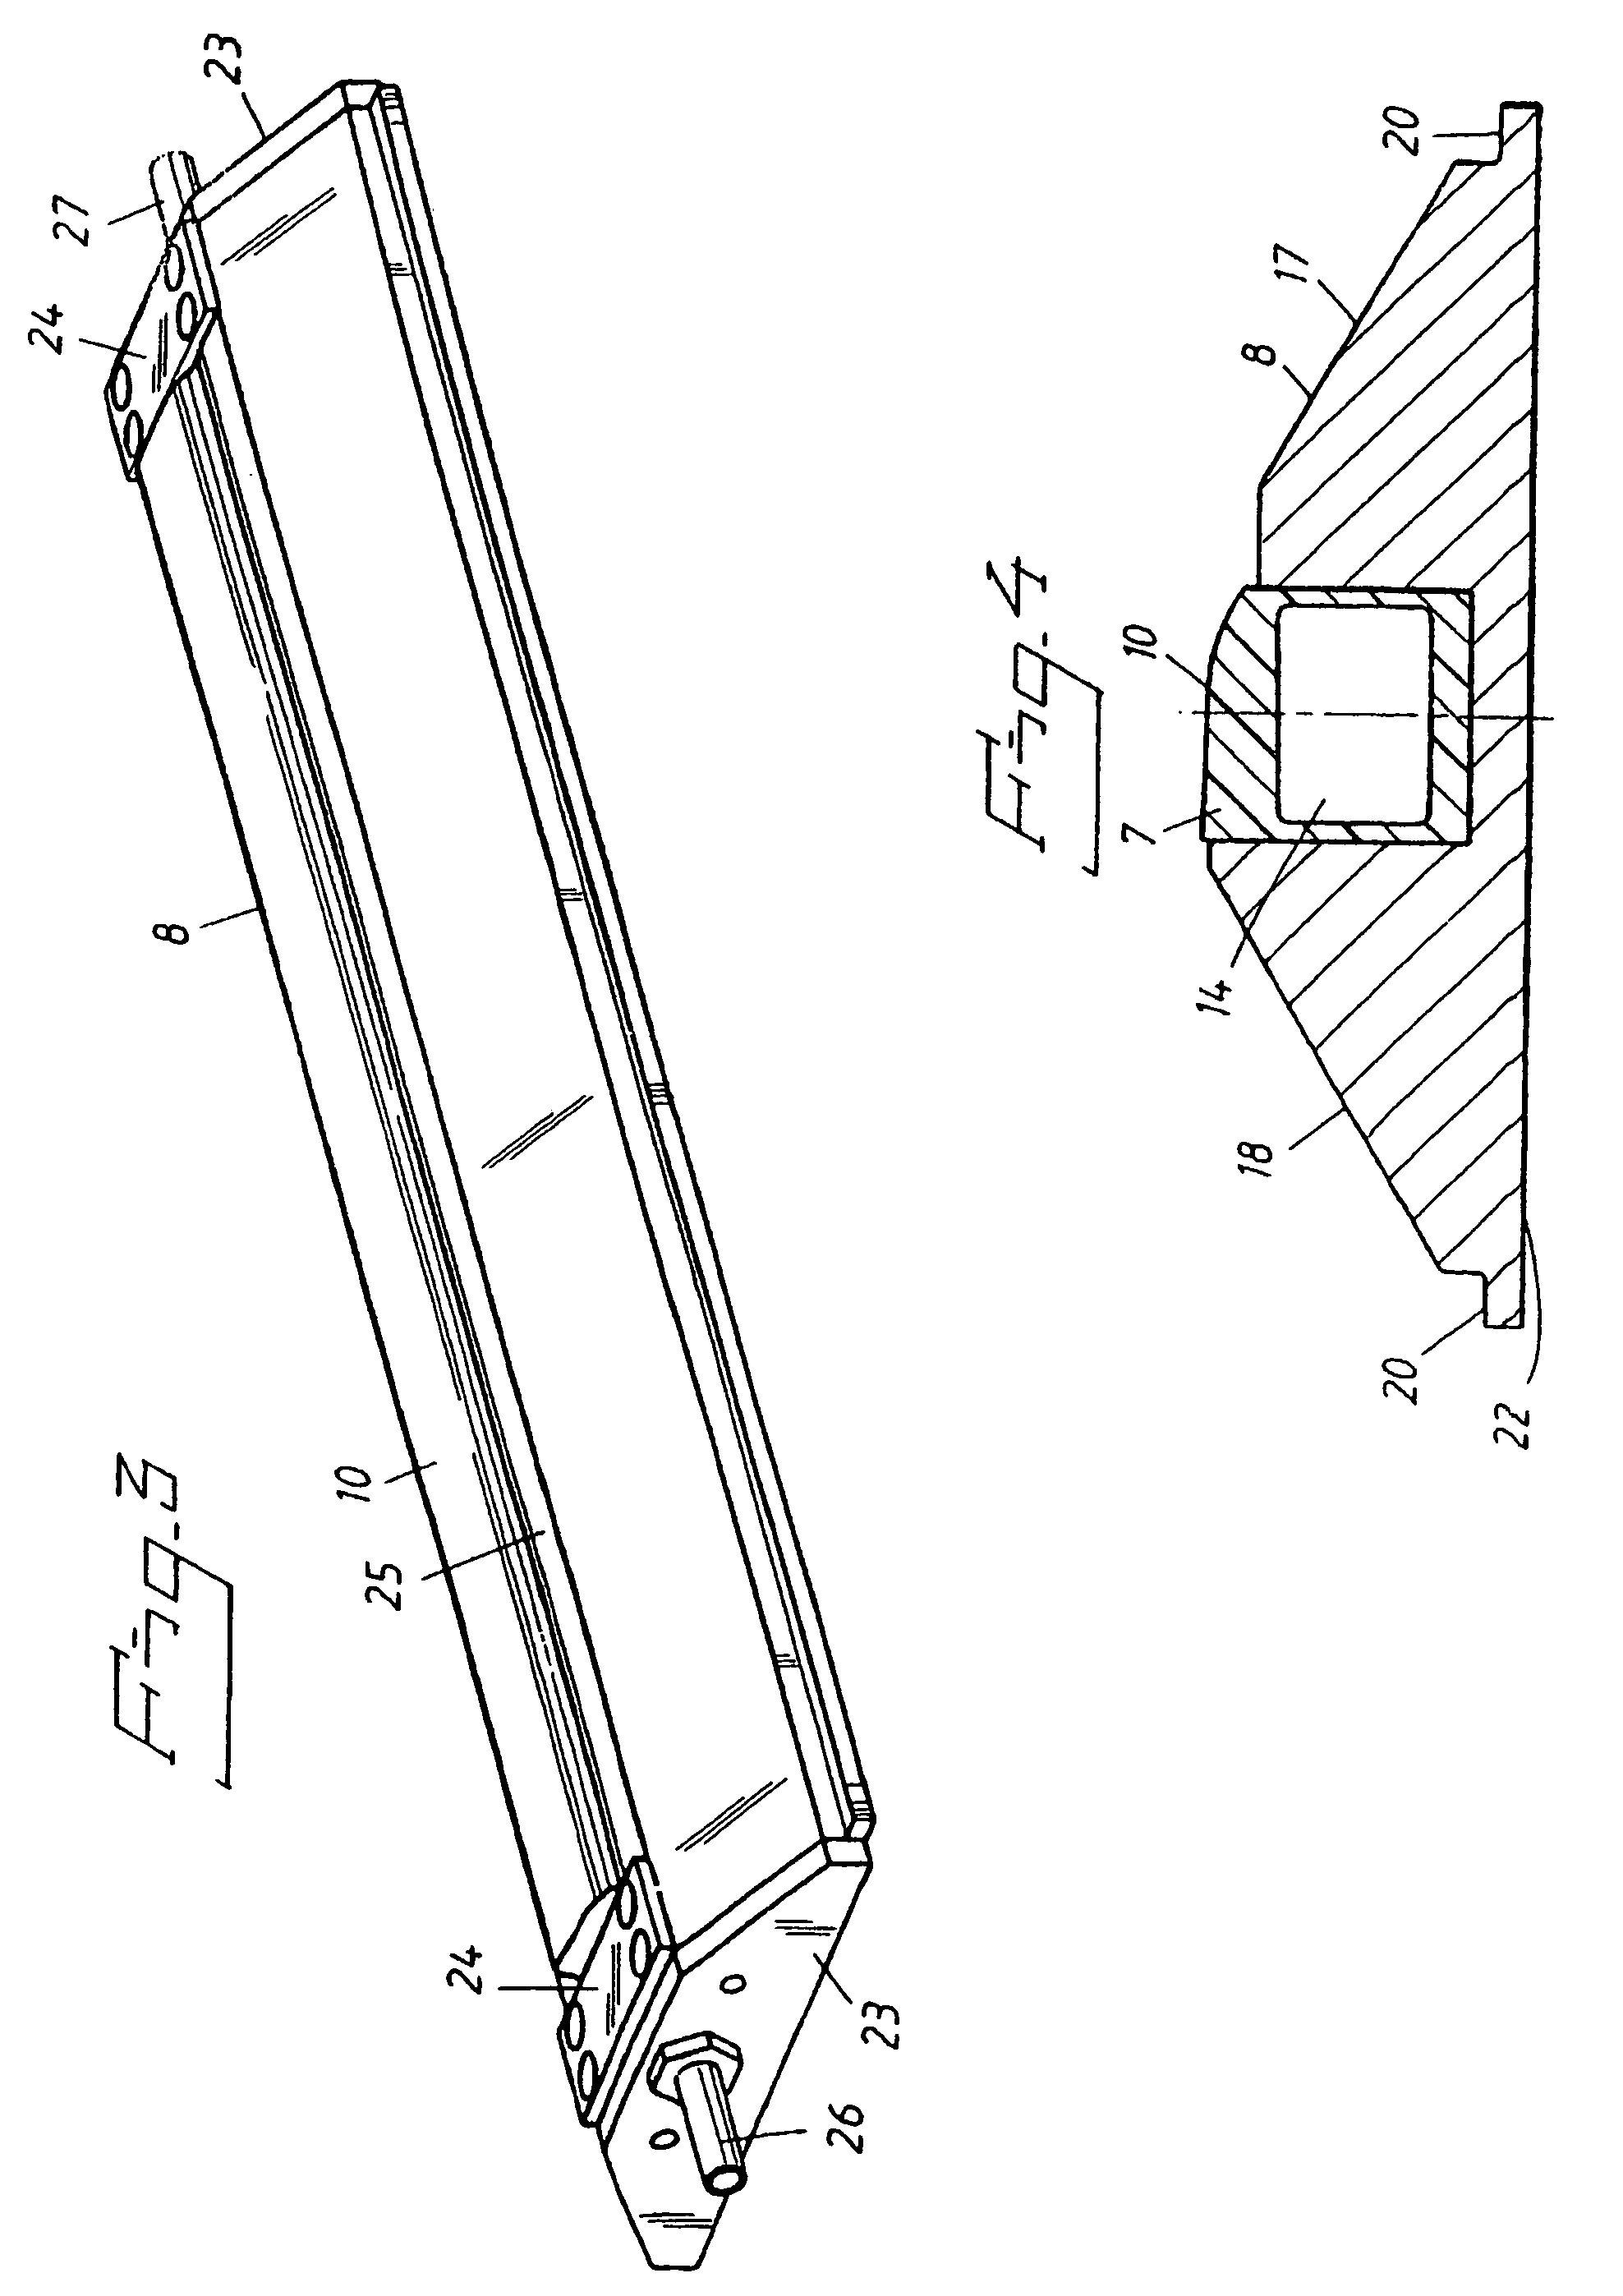 Support body, holding device therefor, apparatus with said body for treatment of a web, and methods of forming an extended nip in the apparatus and controlling load in the nip